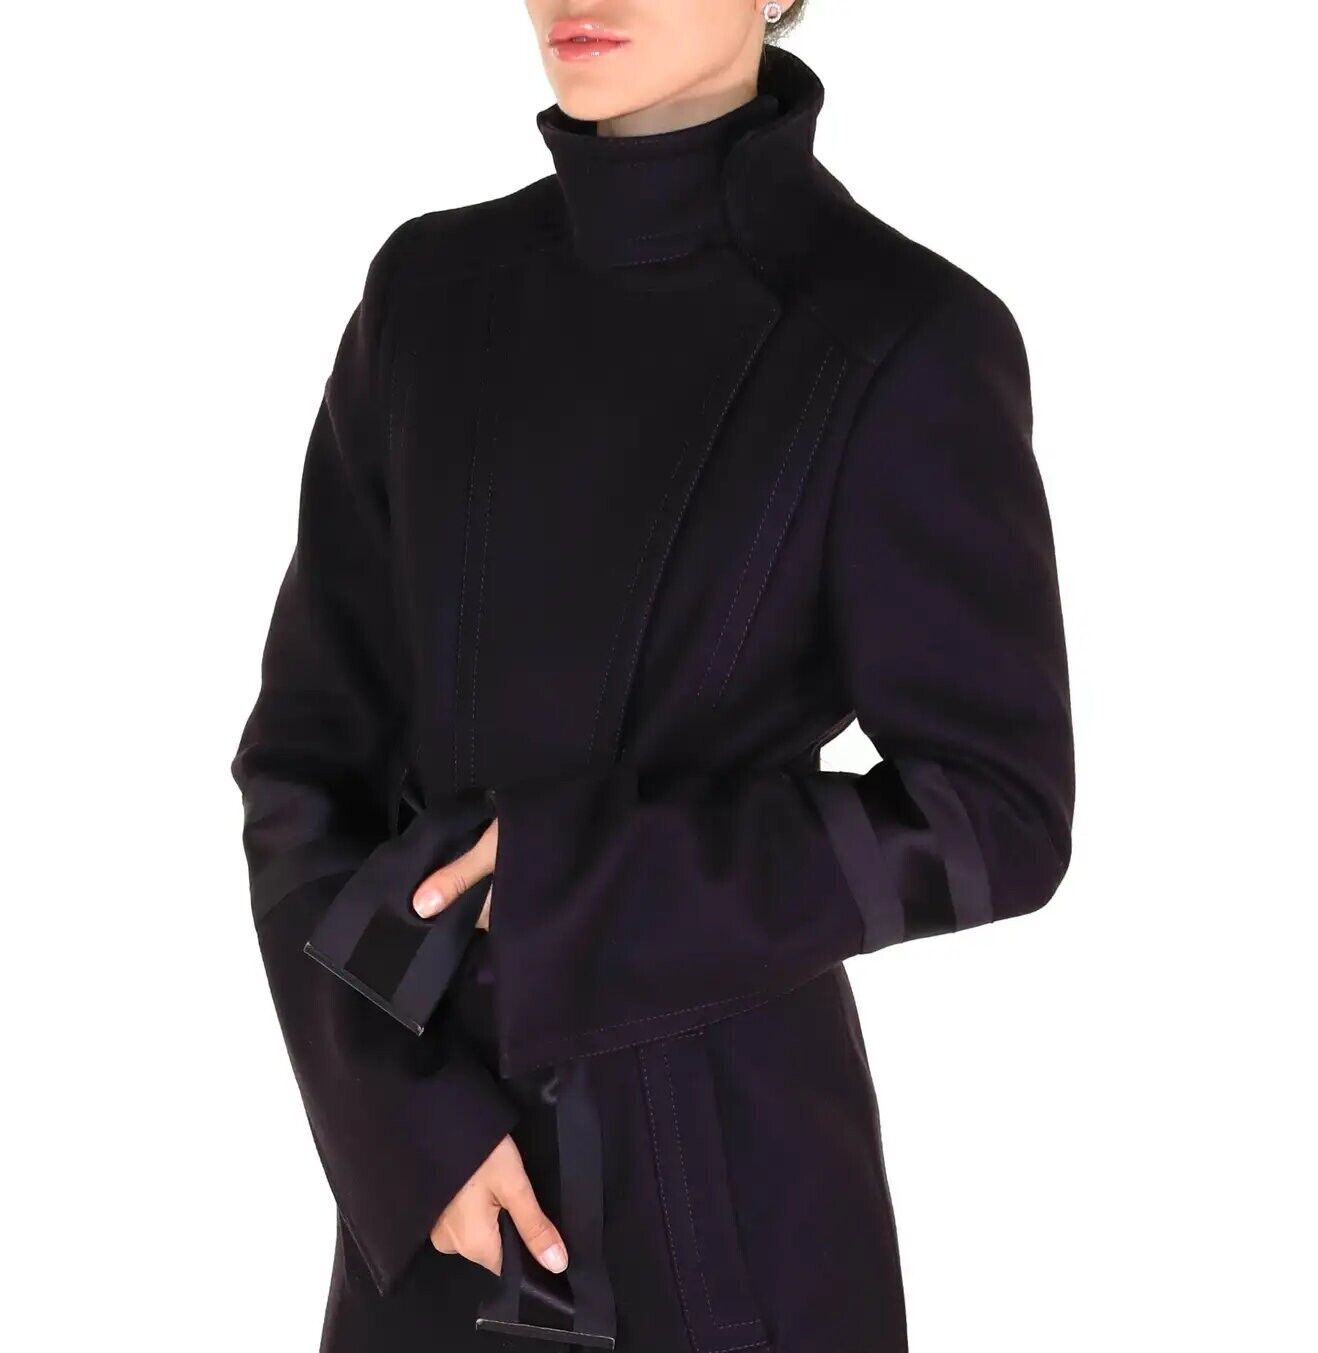 2004 Tom Ford for Gucci Wool Coat - image 5